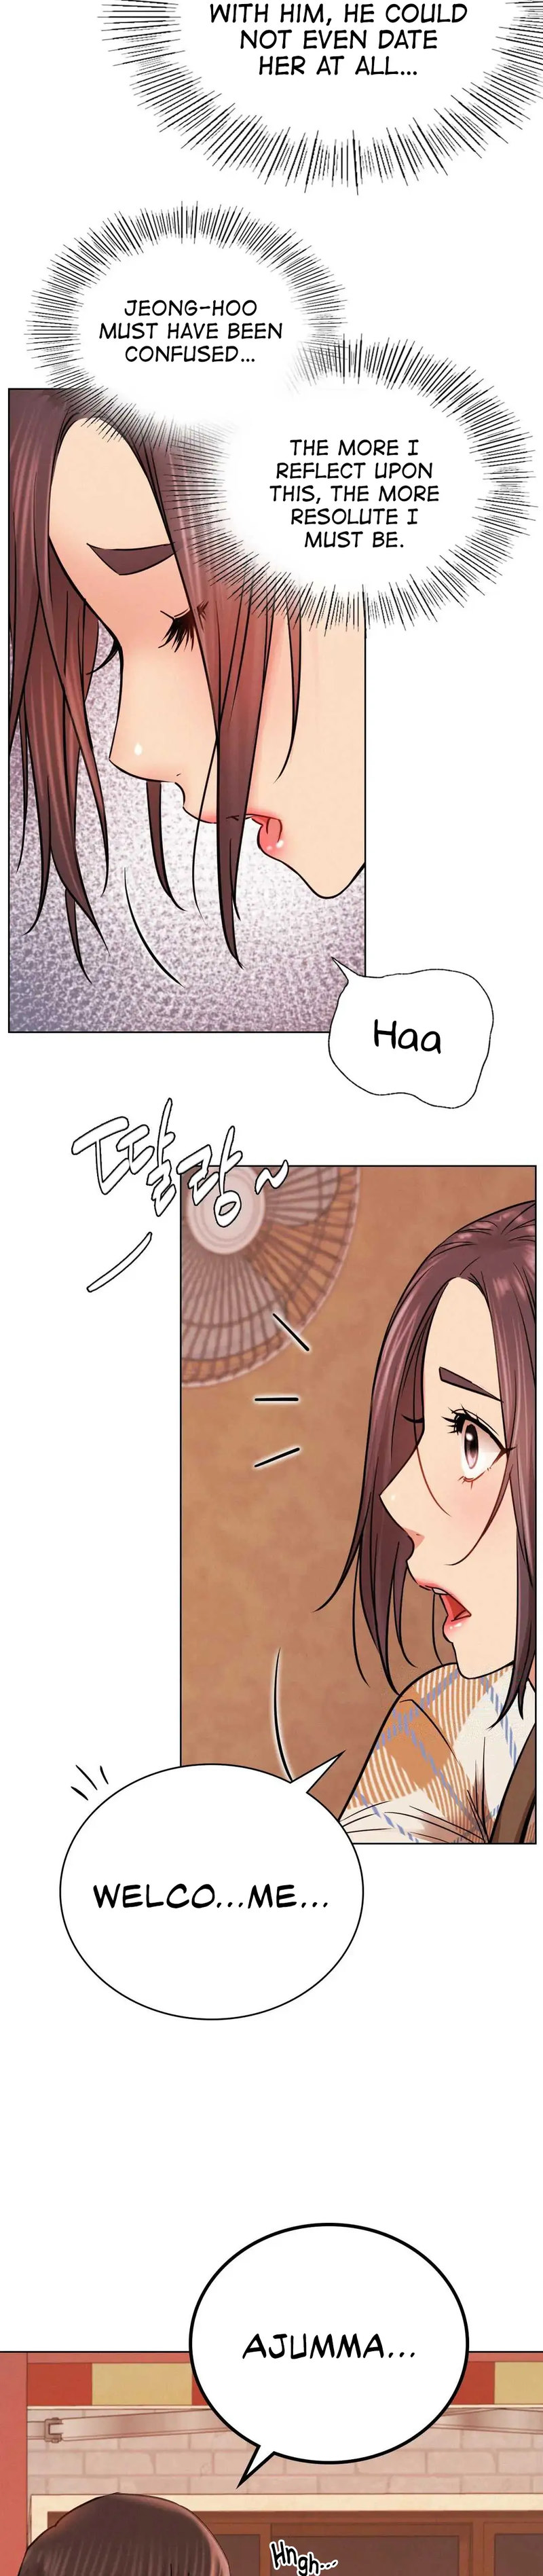 Staying with Ajumma - Chapter 34 Page 2